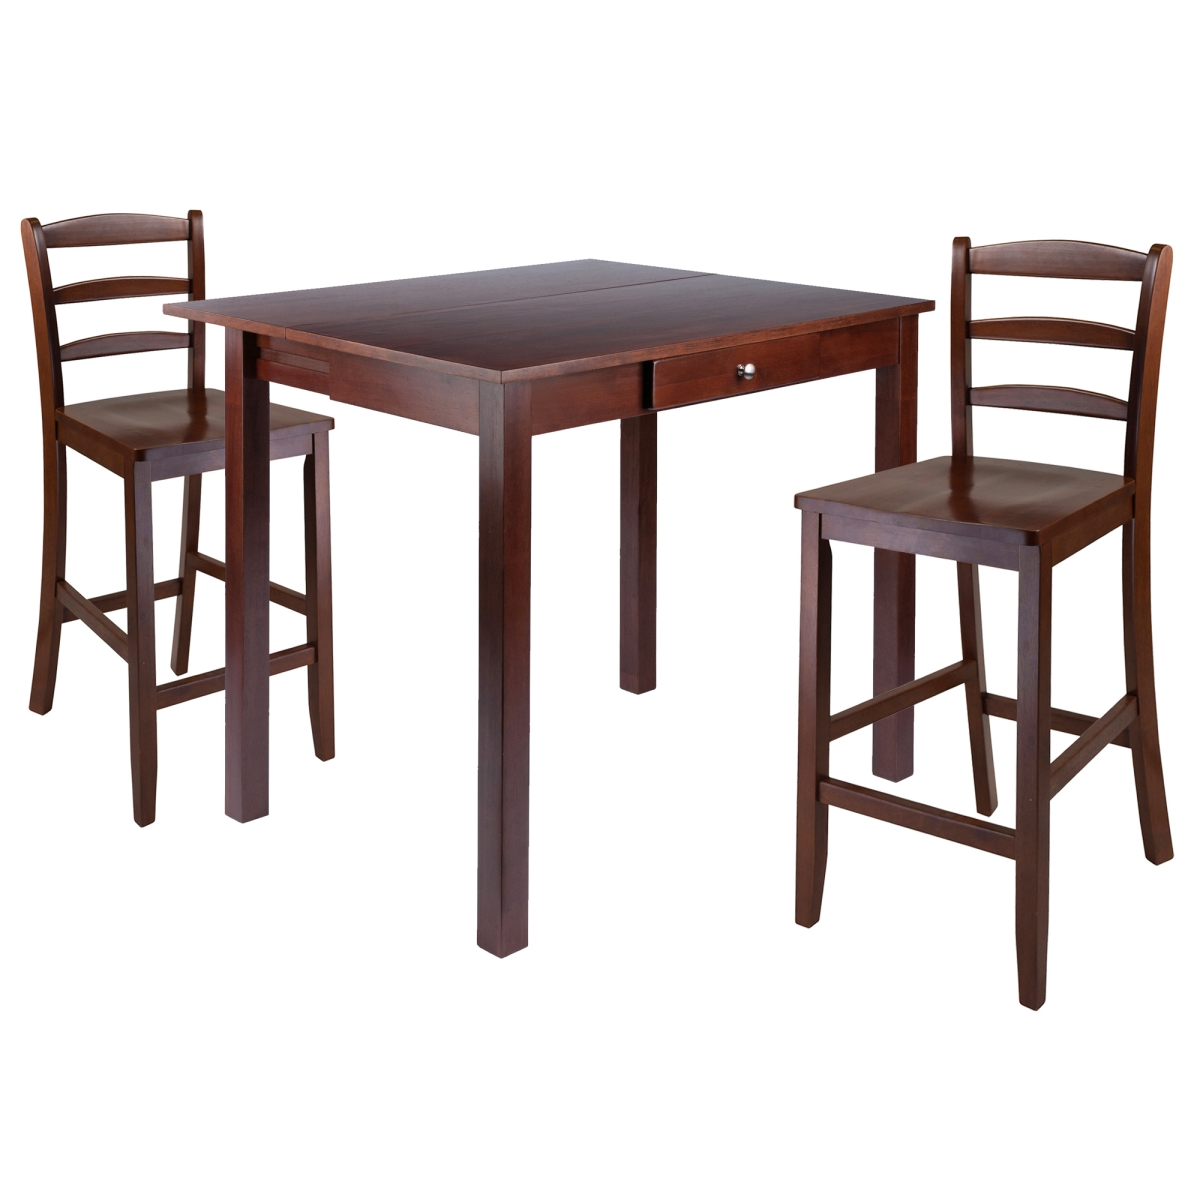 94448 Perrone High Table With Ladder Back Chair - 3 Piece